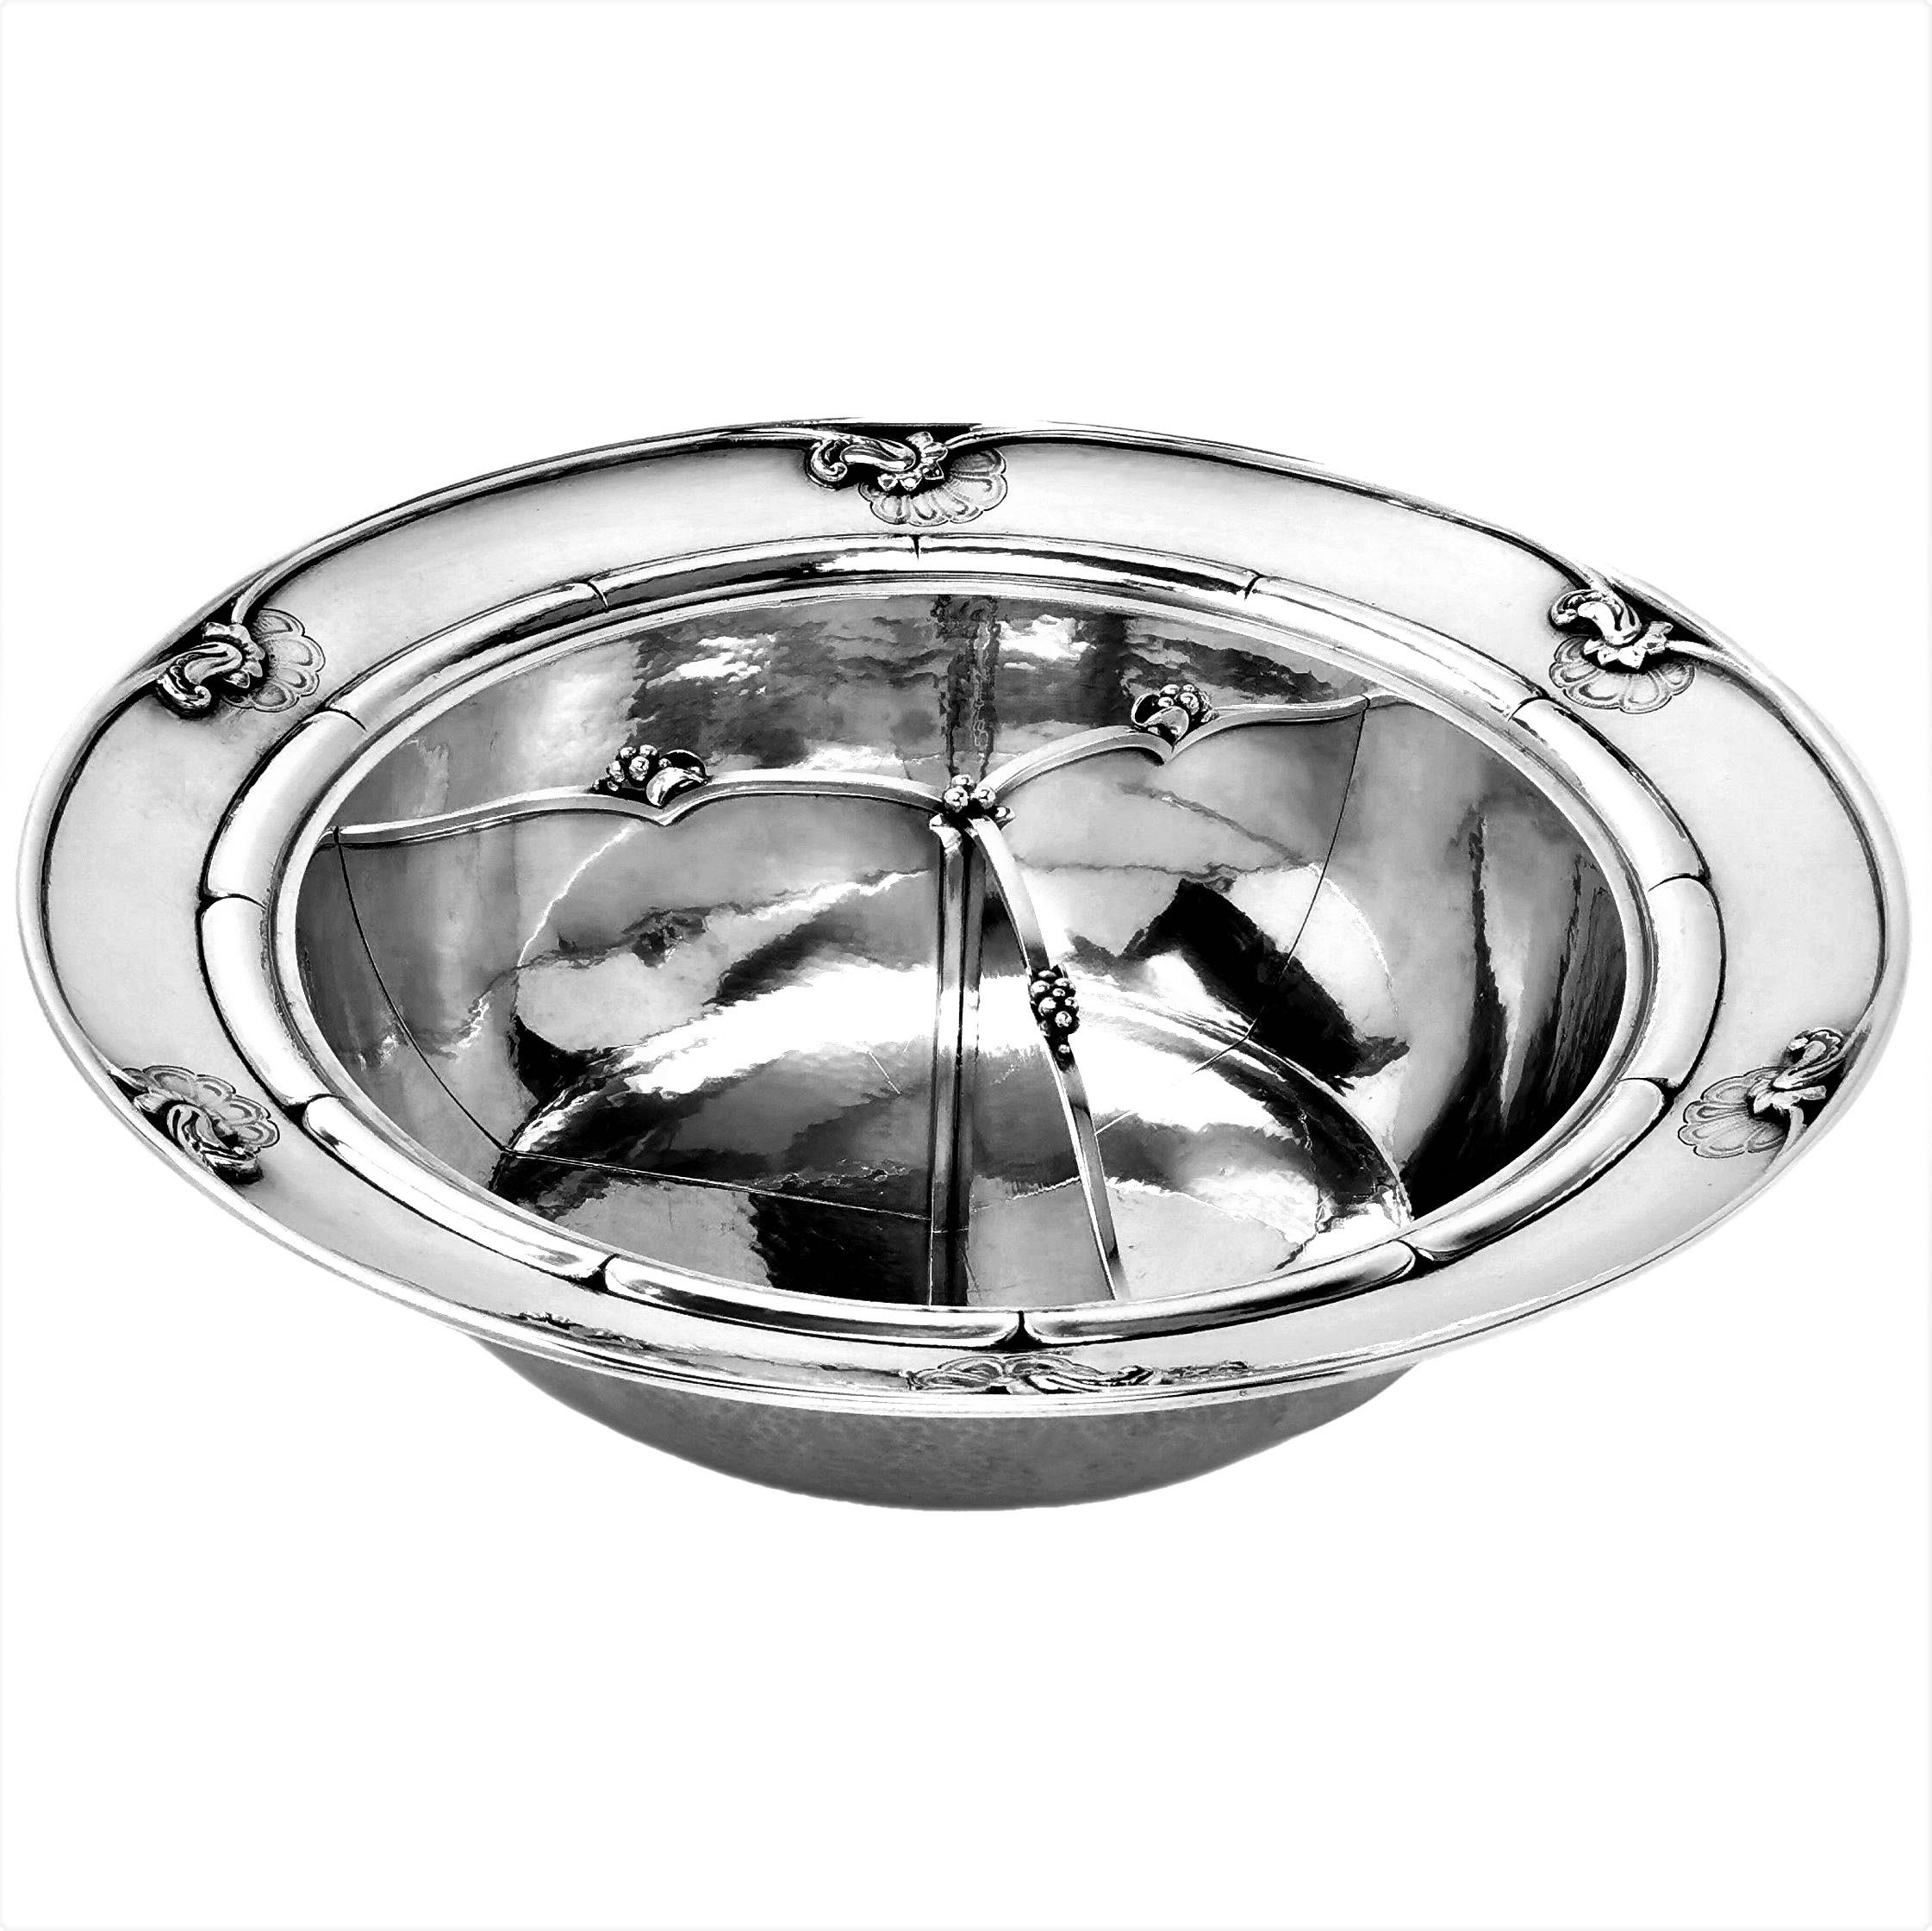 20th Century Georg Jensen Danish Sterling Silver Vegetable Tureen Dish & Cover 228H 1945-77 For Sale